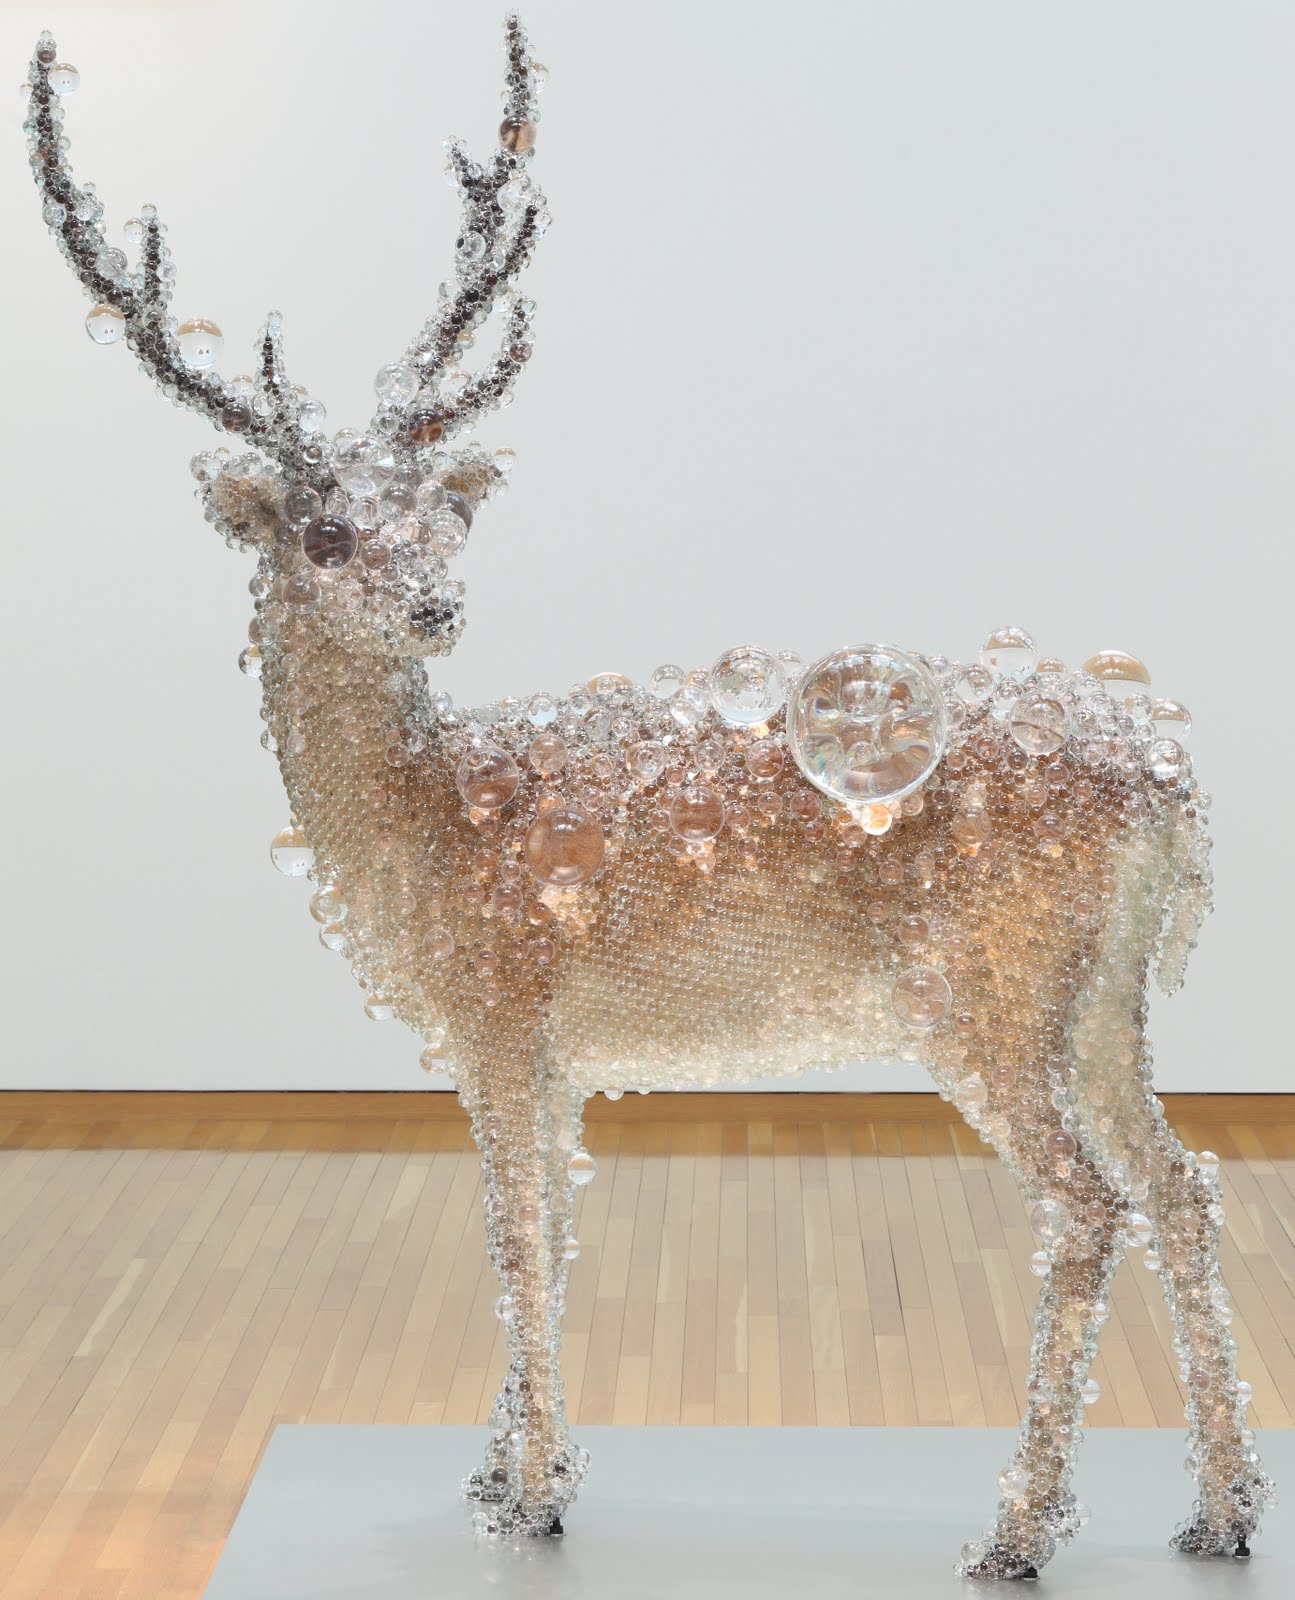 Taxidermy Sculptures by Kohei Nawa